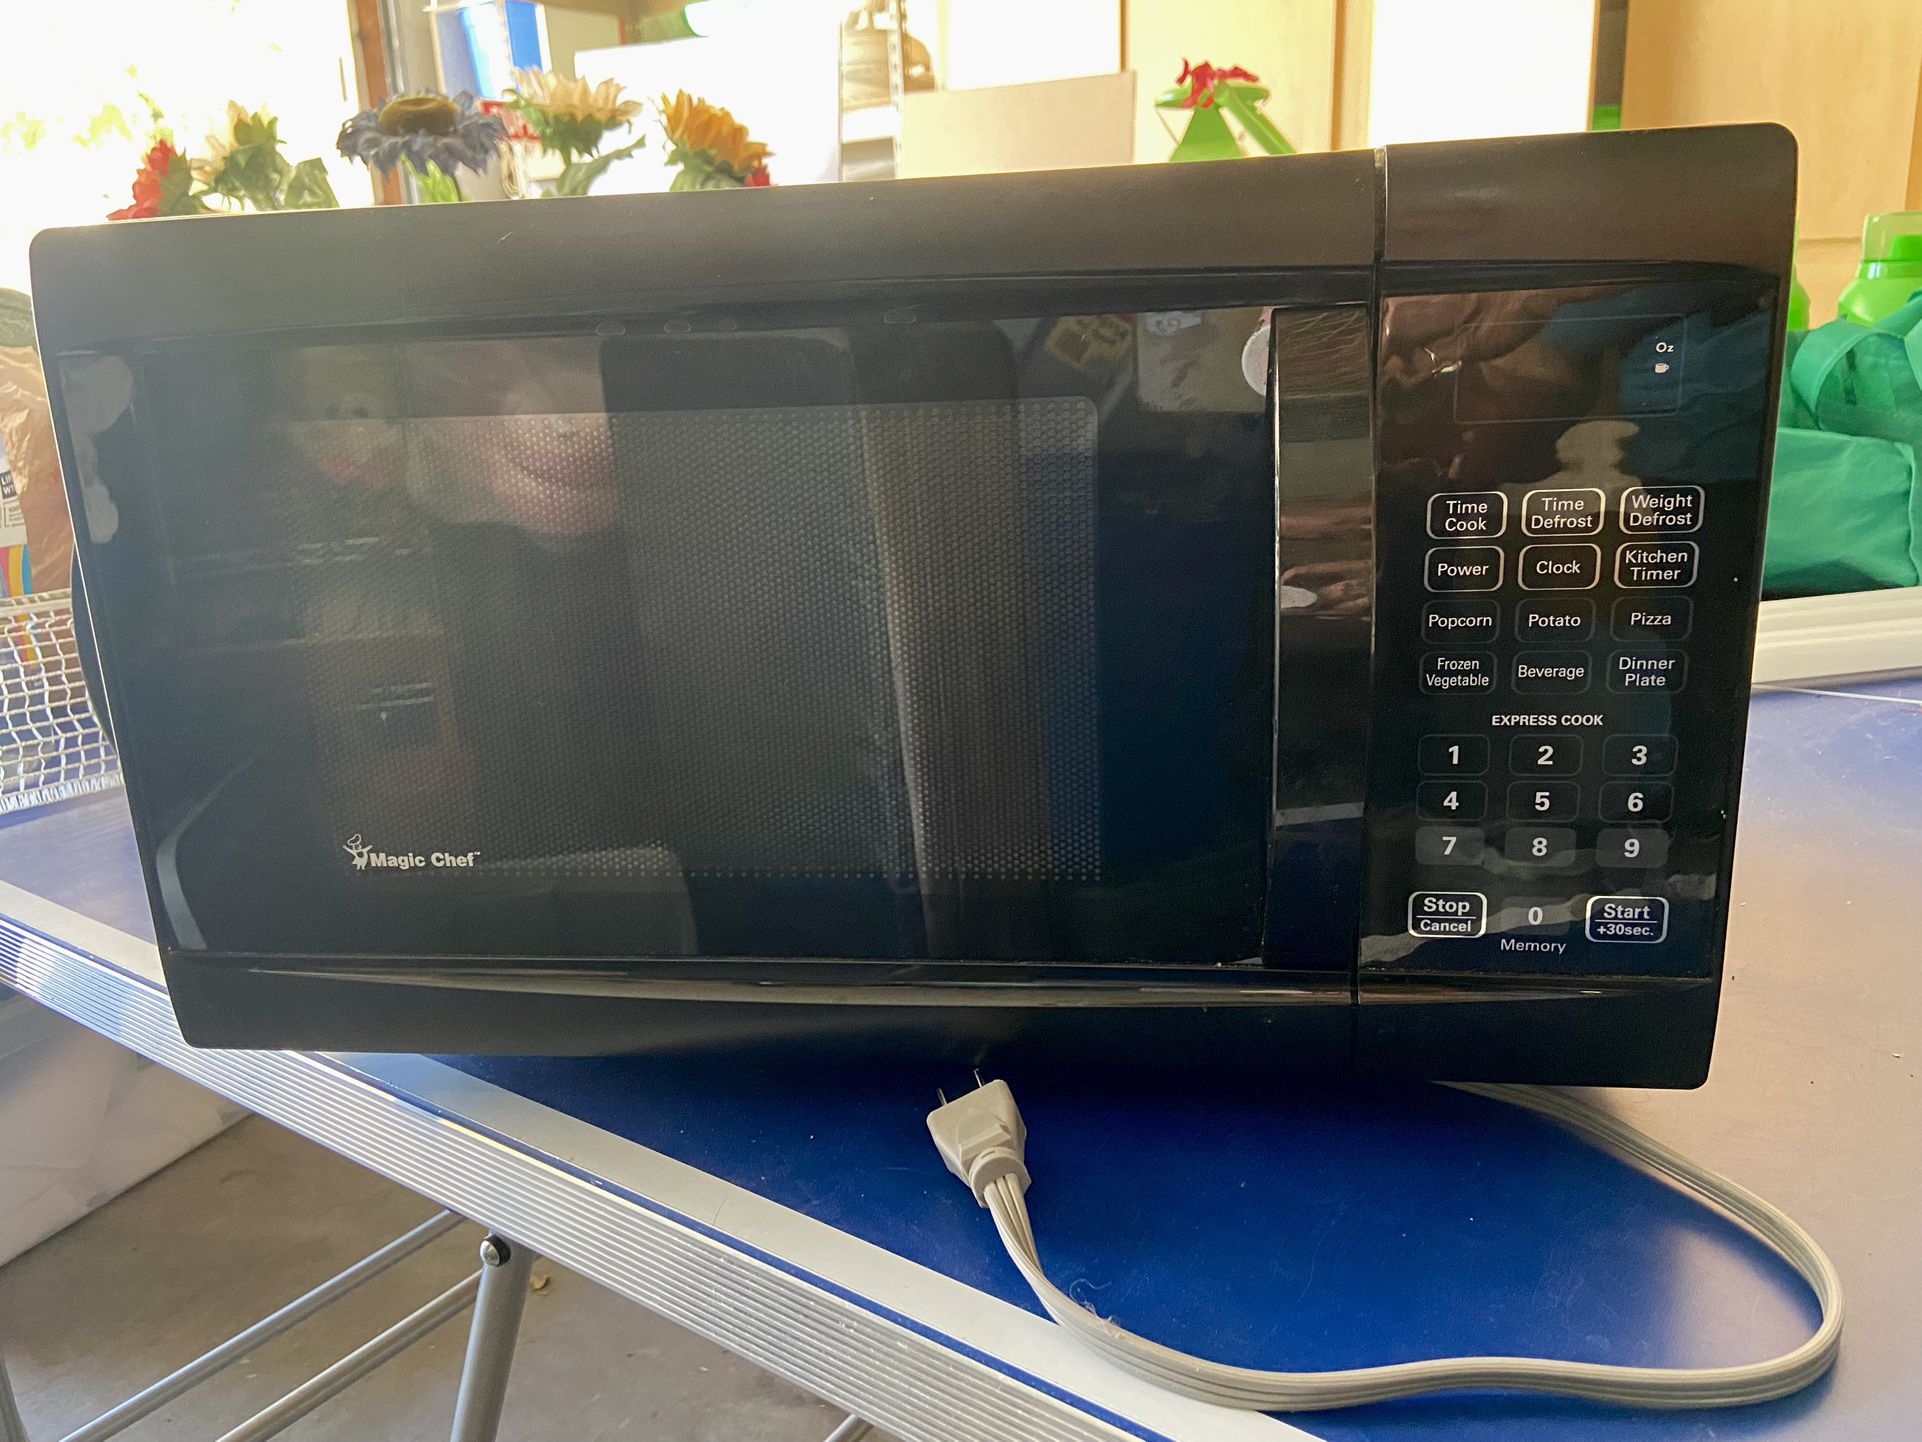 counter microwave - magic chef countertop microwave - excellent condition. Pick up at 67 ave and union hills